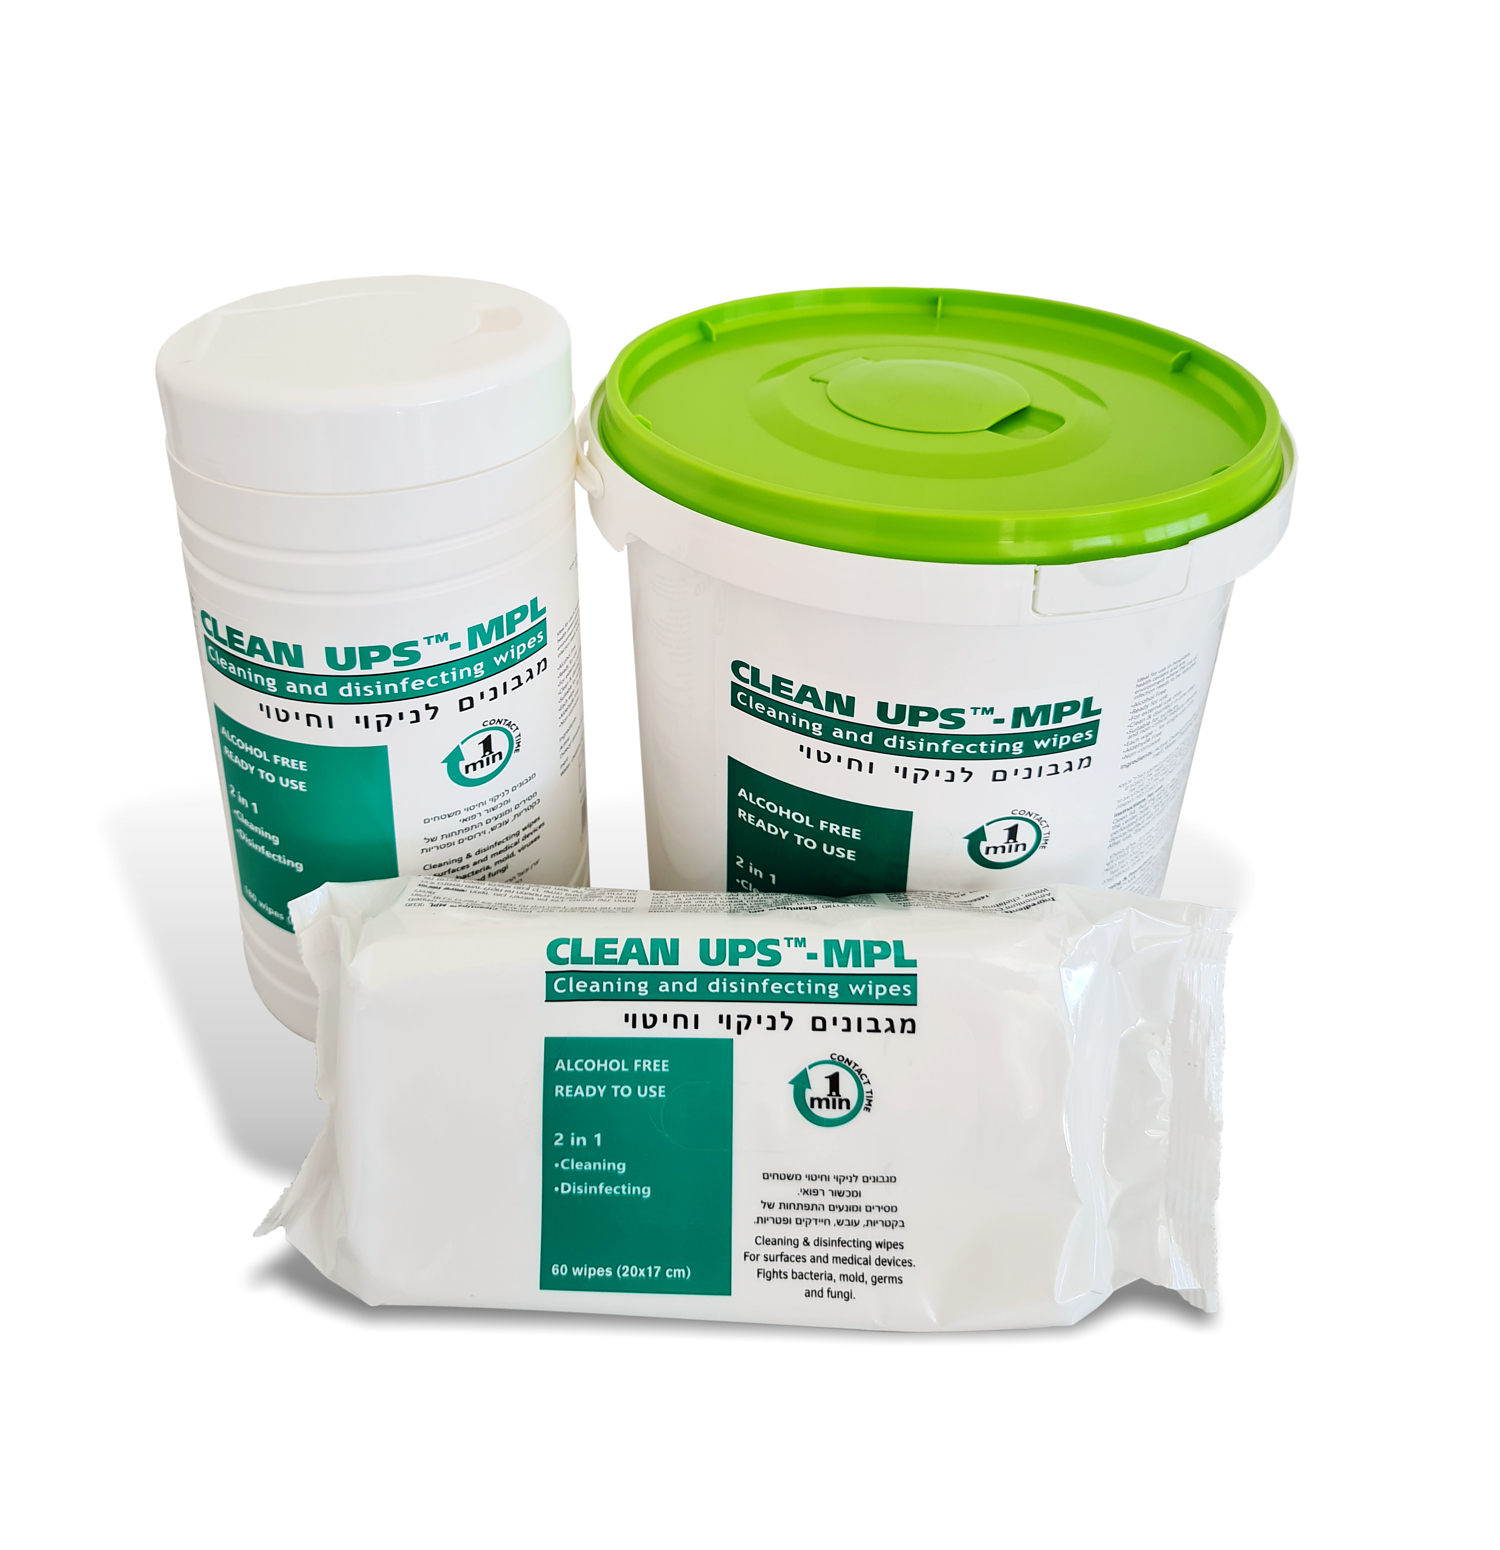 Clean-Ups™ MPL Disinfection Wipes